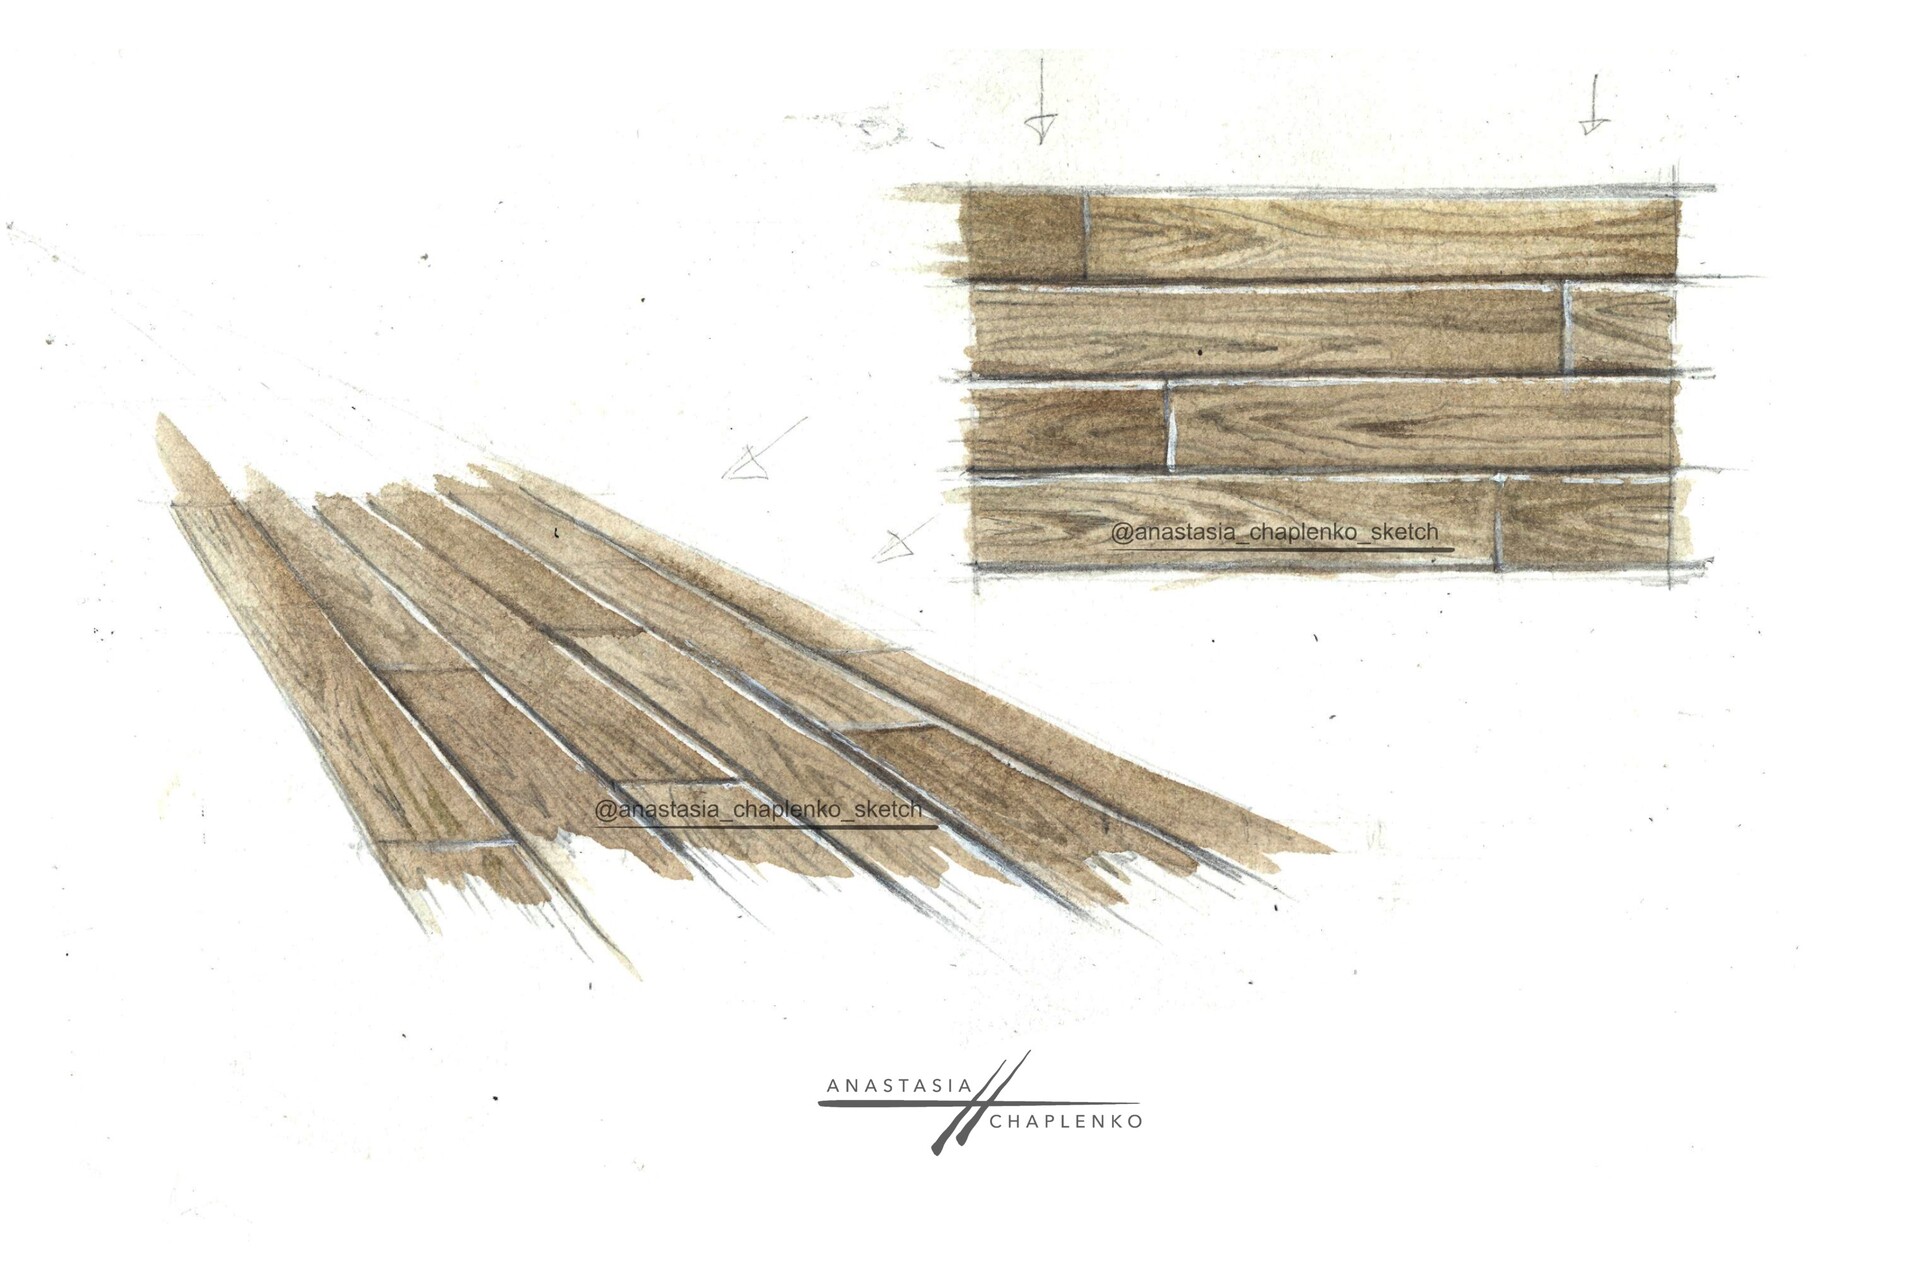 Wood grain texture made with curves | Texture drawing, Texture art, Drawings